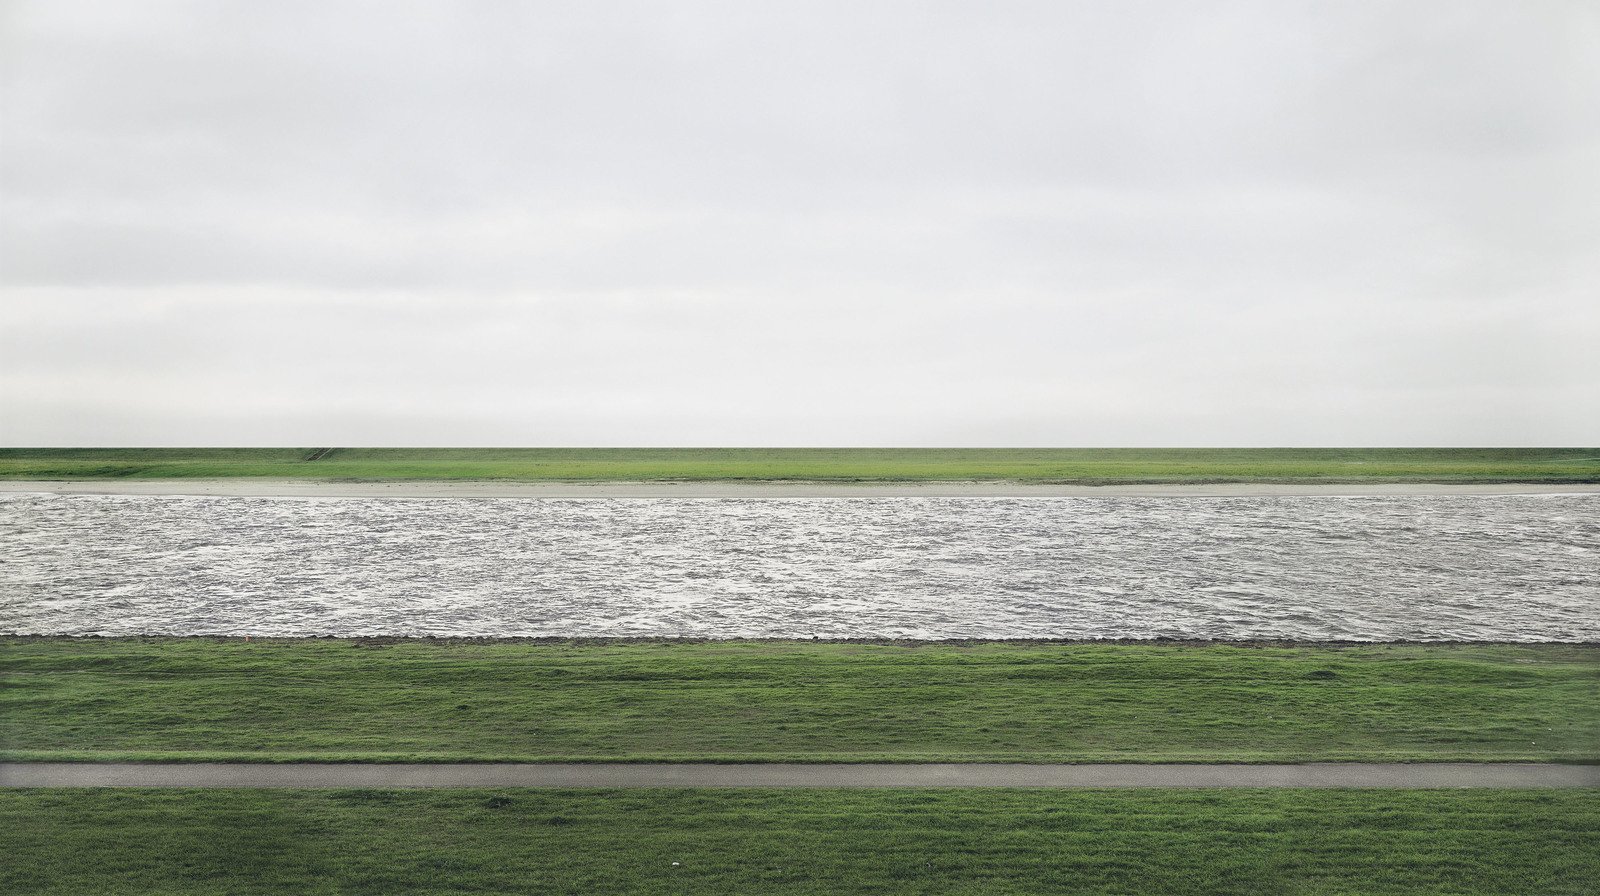 Andreas Gursky. Rhine II. 1999. Photo. Private collection.